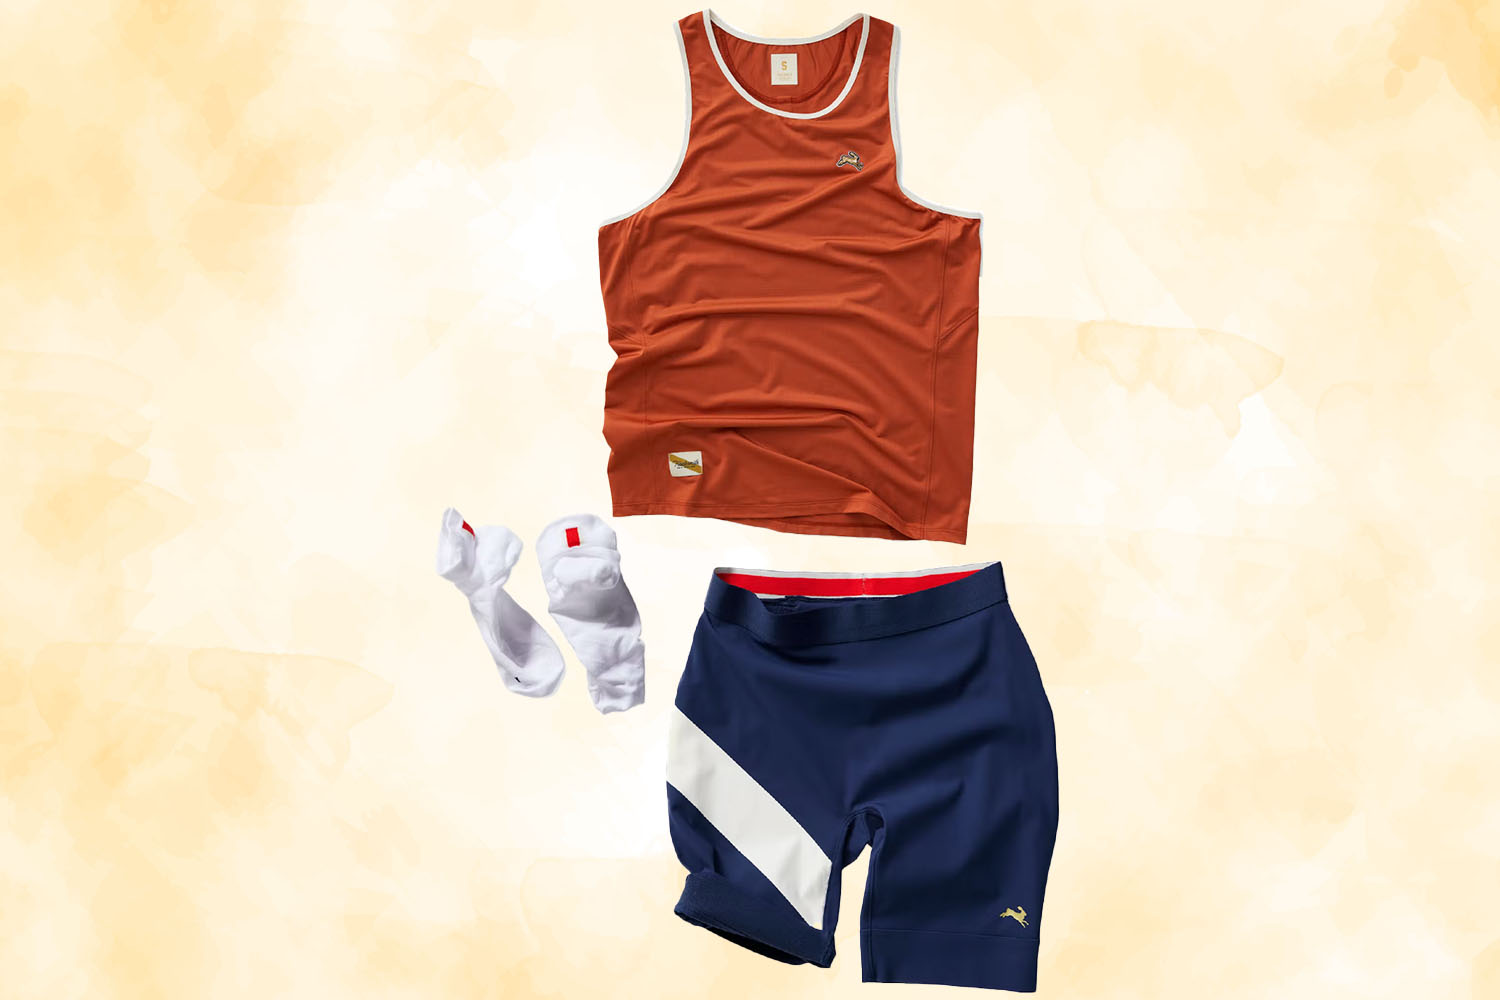 a Speed Racer kit with tank, short tights and socks from Tracksmith on a gold textured background